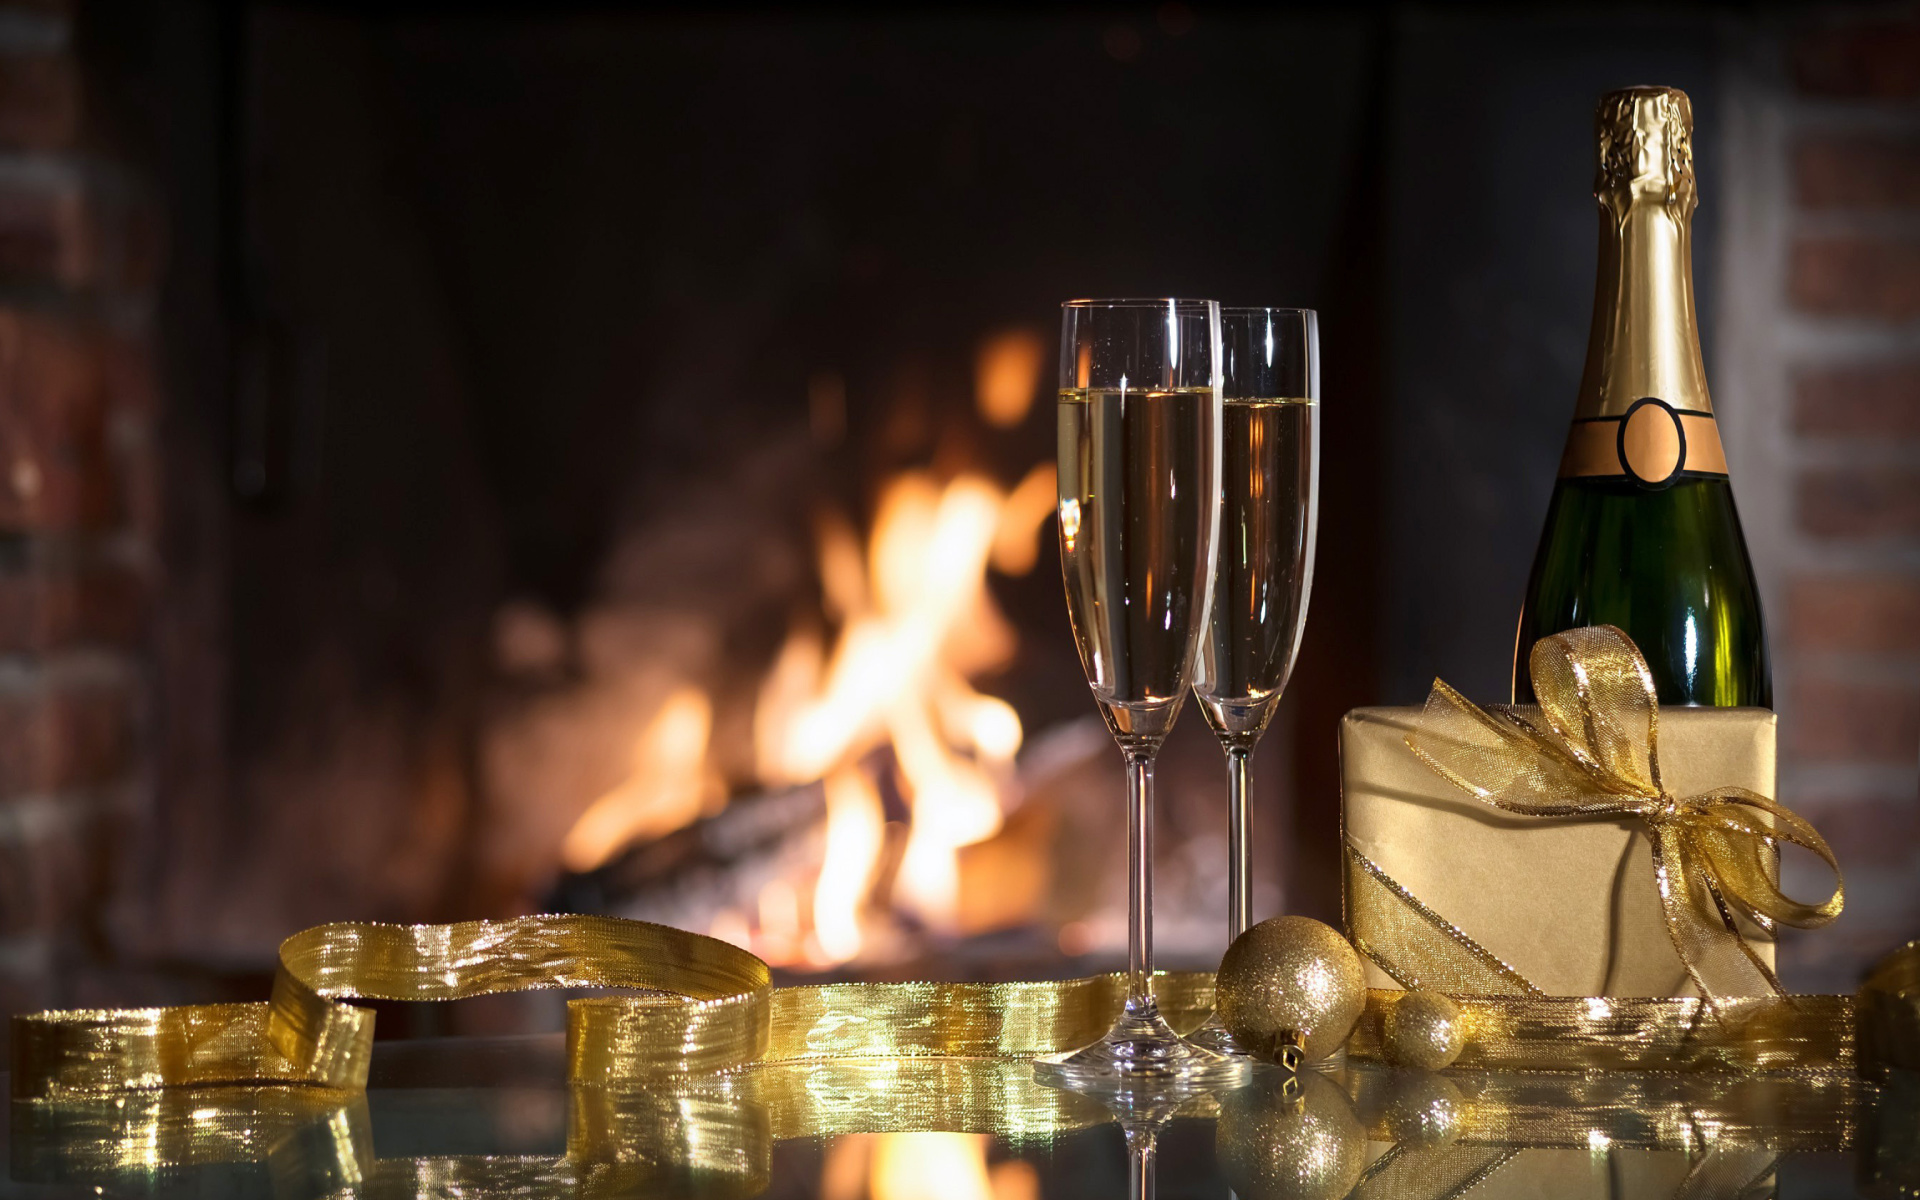 Das Champagne and Fireplace Wallpaper 1920x1200